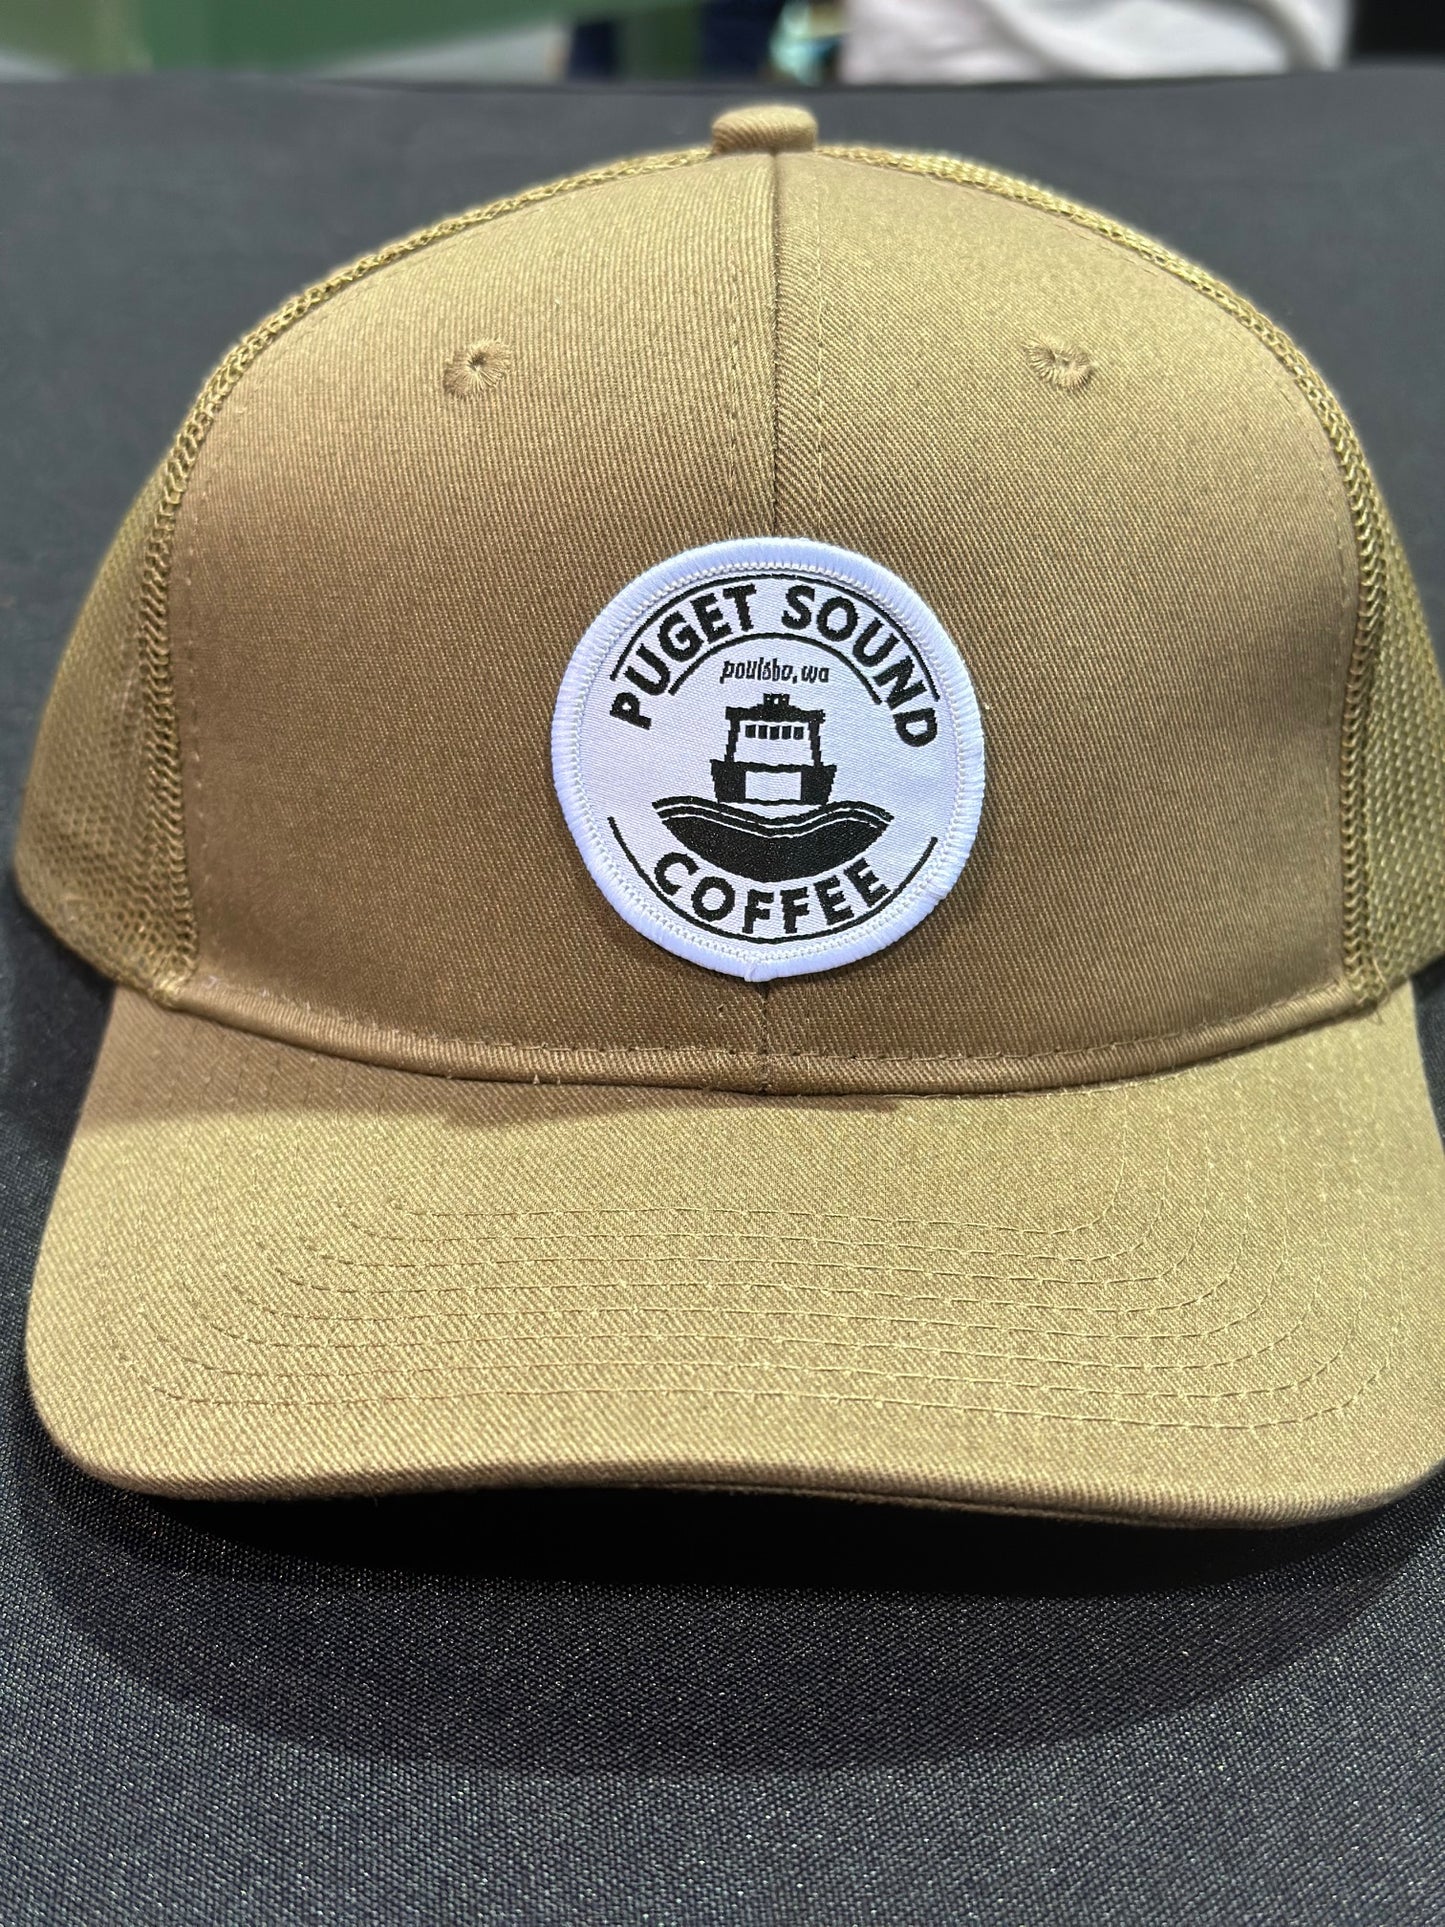 Puget Sound Coffee Patch on a Trucker Hat